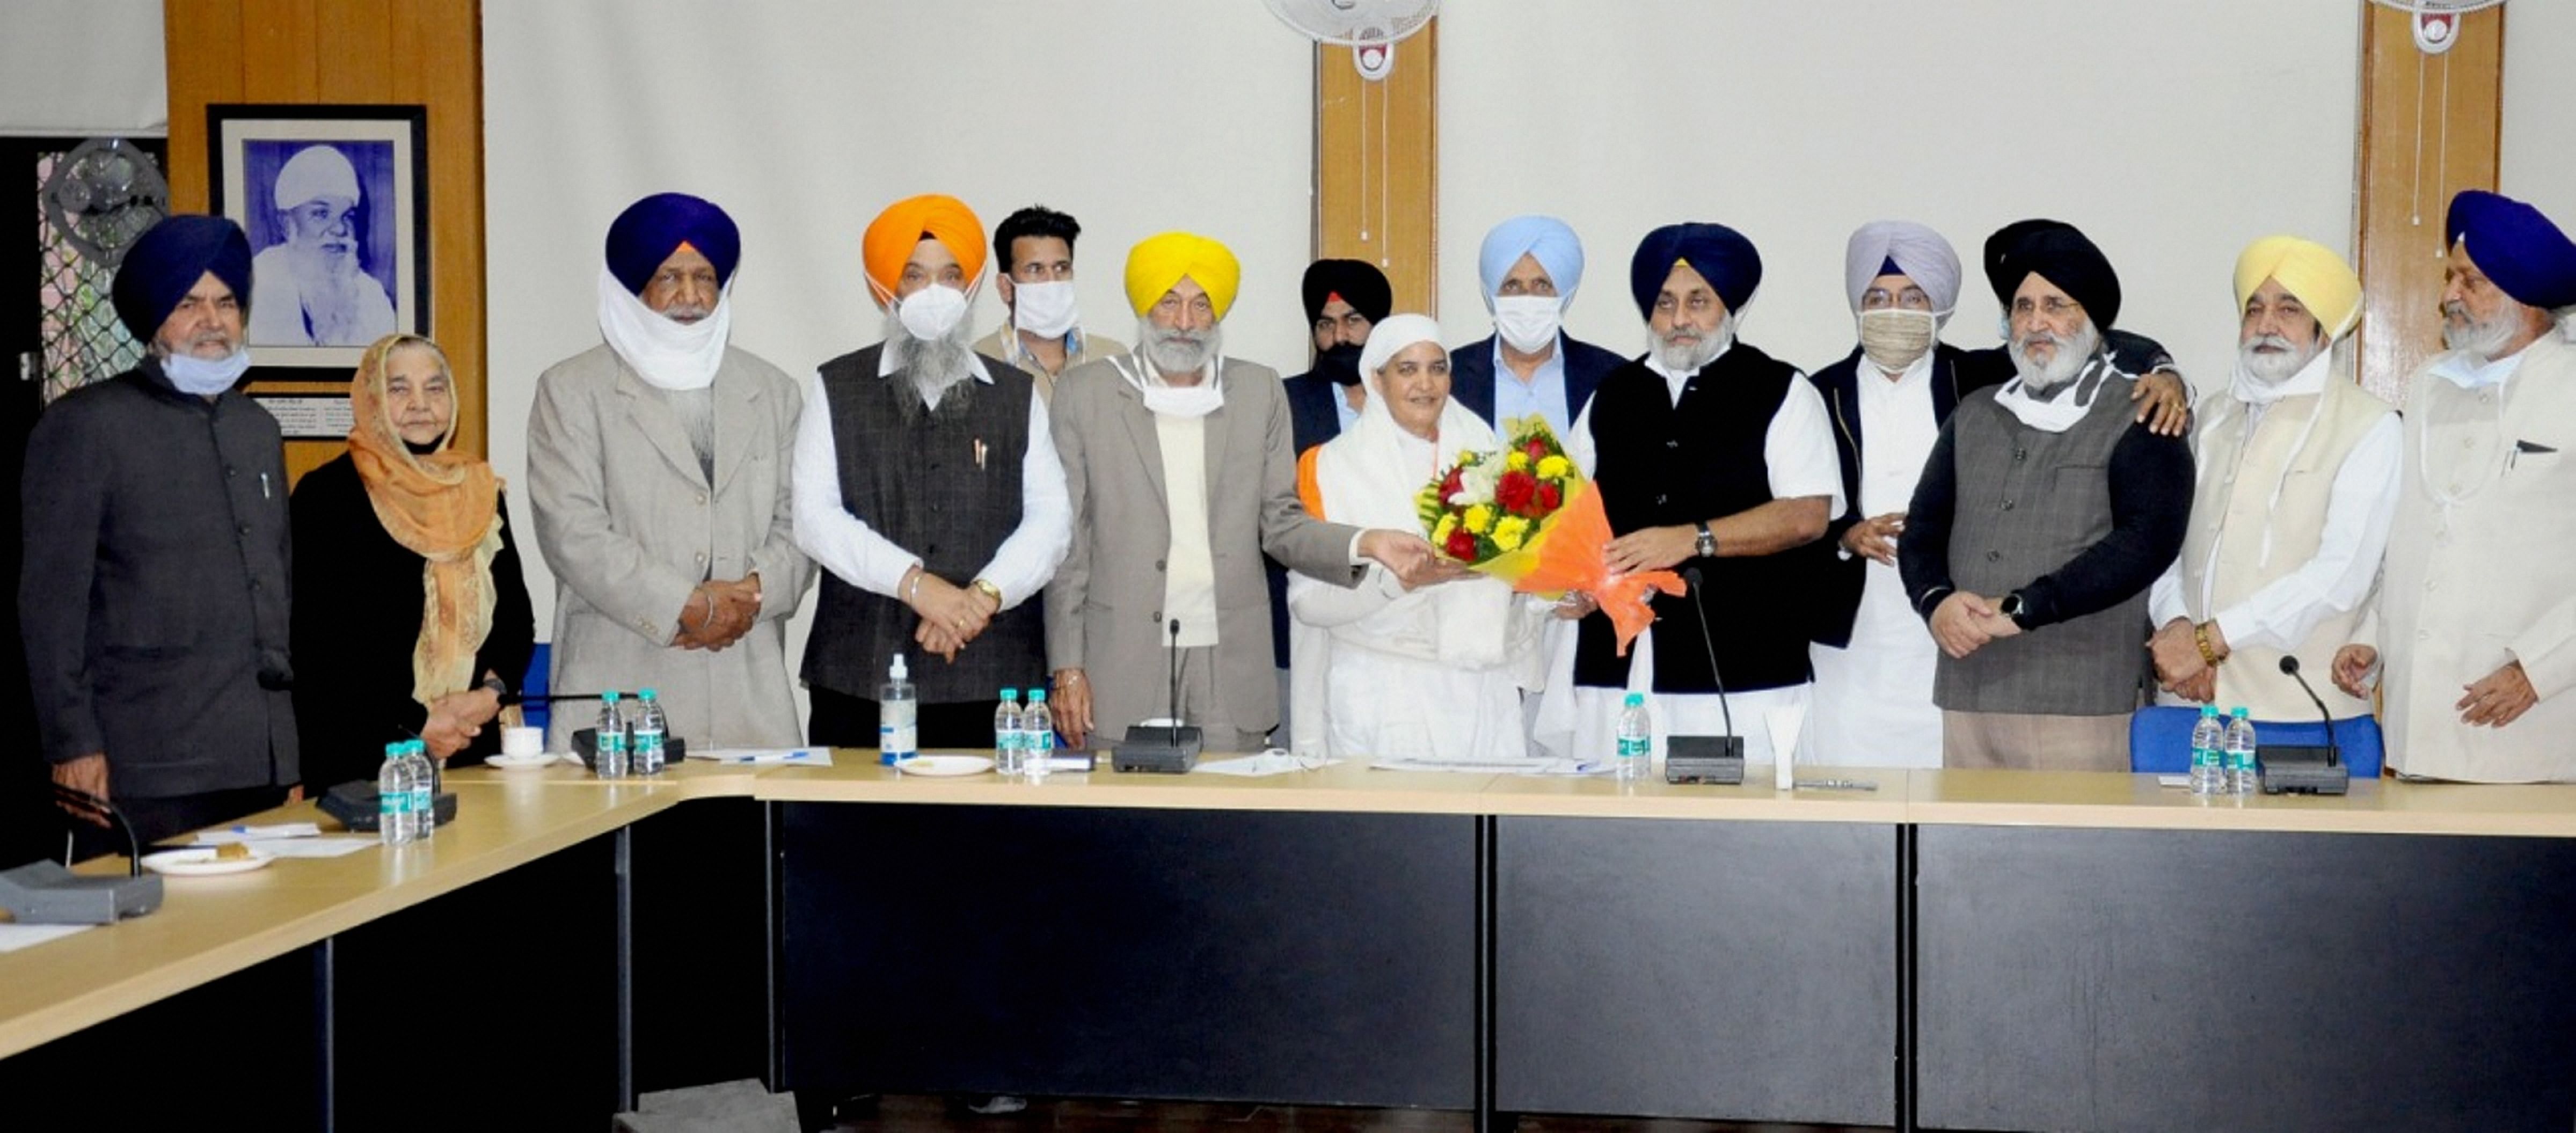 Shiromani Akali Dal (SAD) leaders during party's Core Committee meeting on the ongoing farmers' 'Delhi Chalo' agitation over Centre's farm reform laws, in Chandigarh. Credit: Twitter/@officeofssbadal